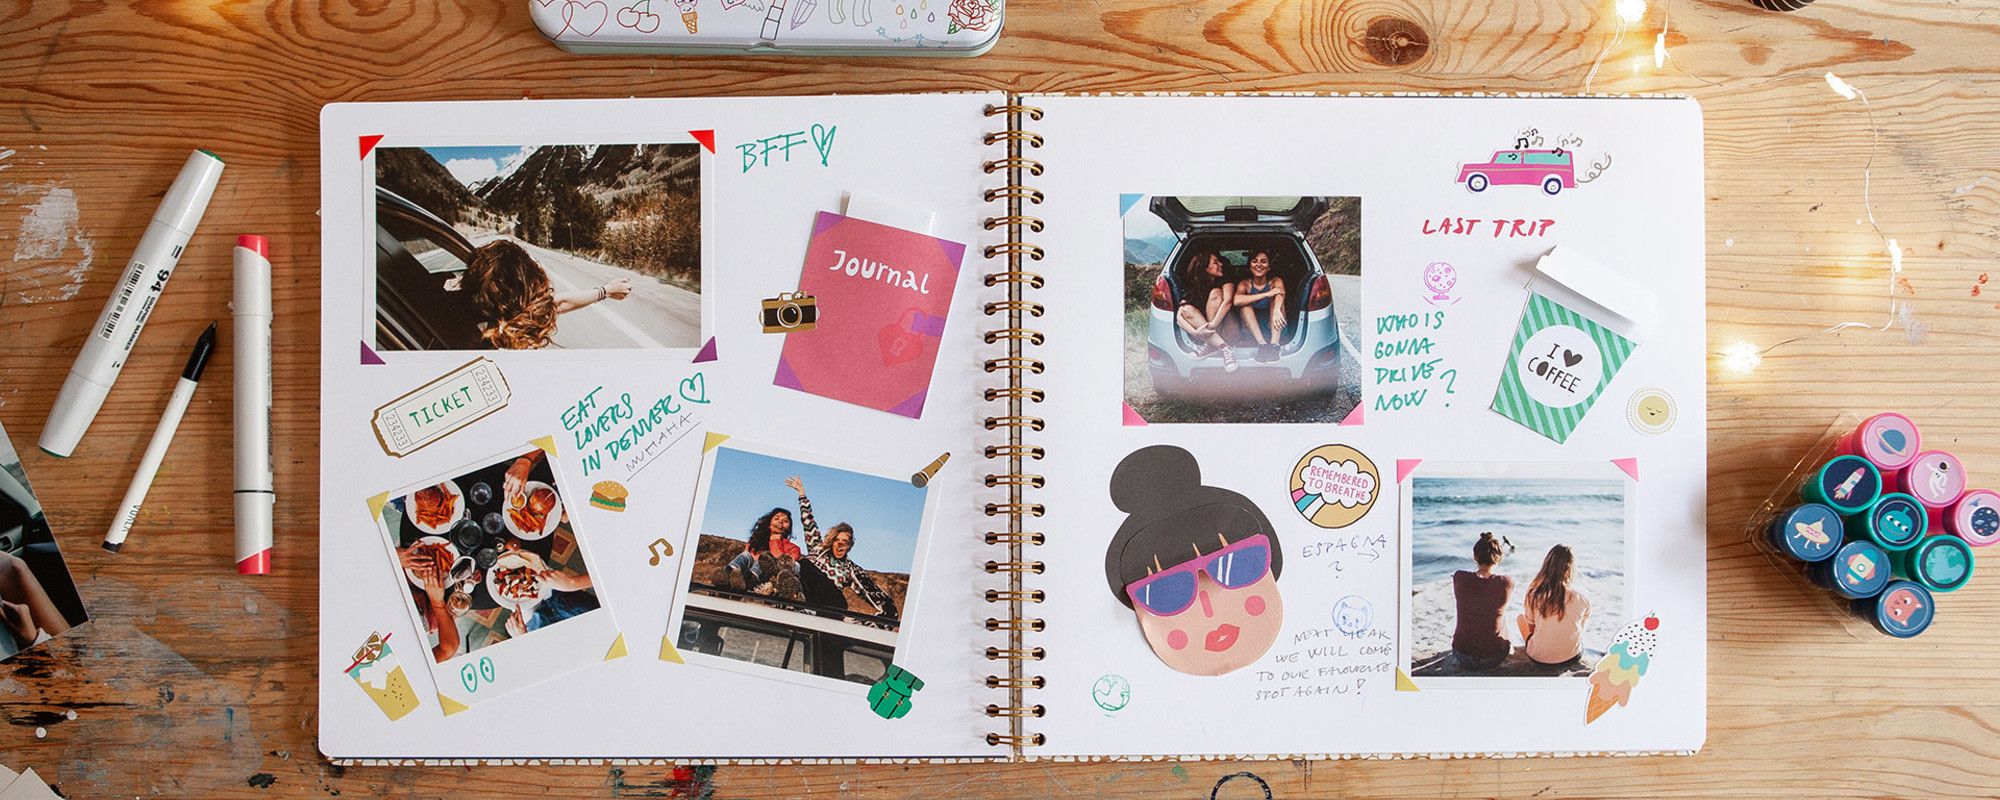 How to make a scrapbook in 4 simple steps | Squared.one